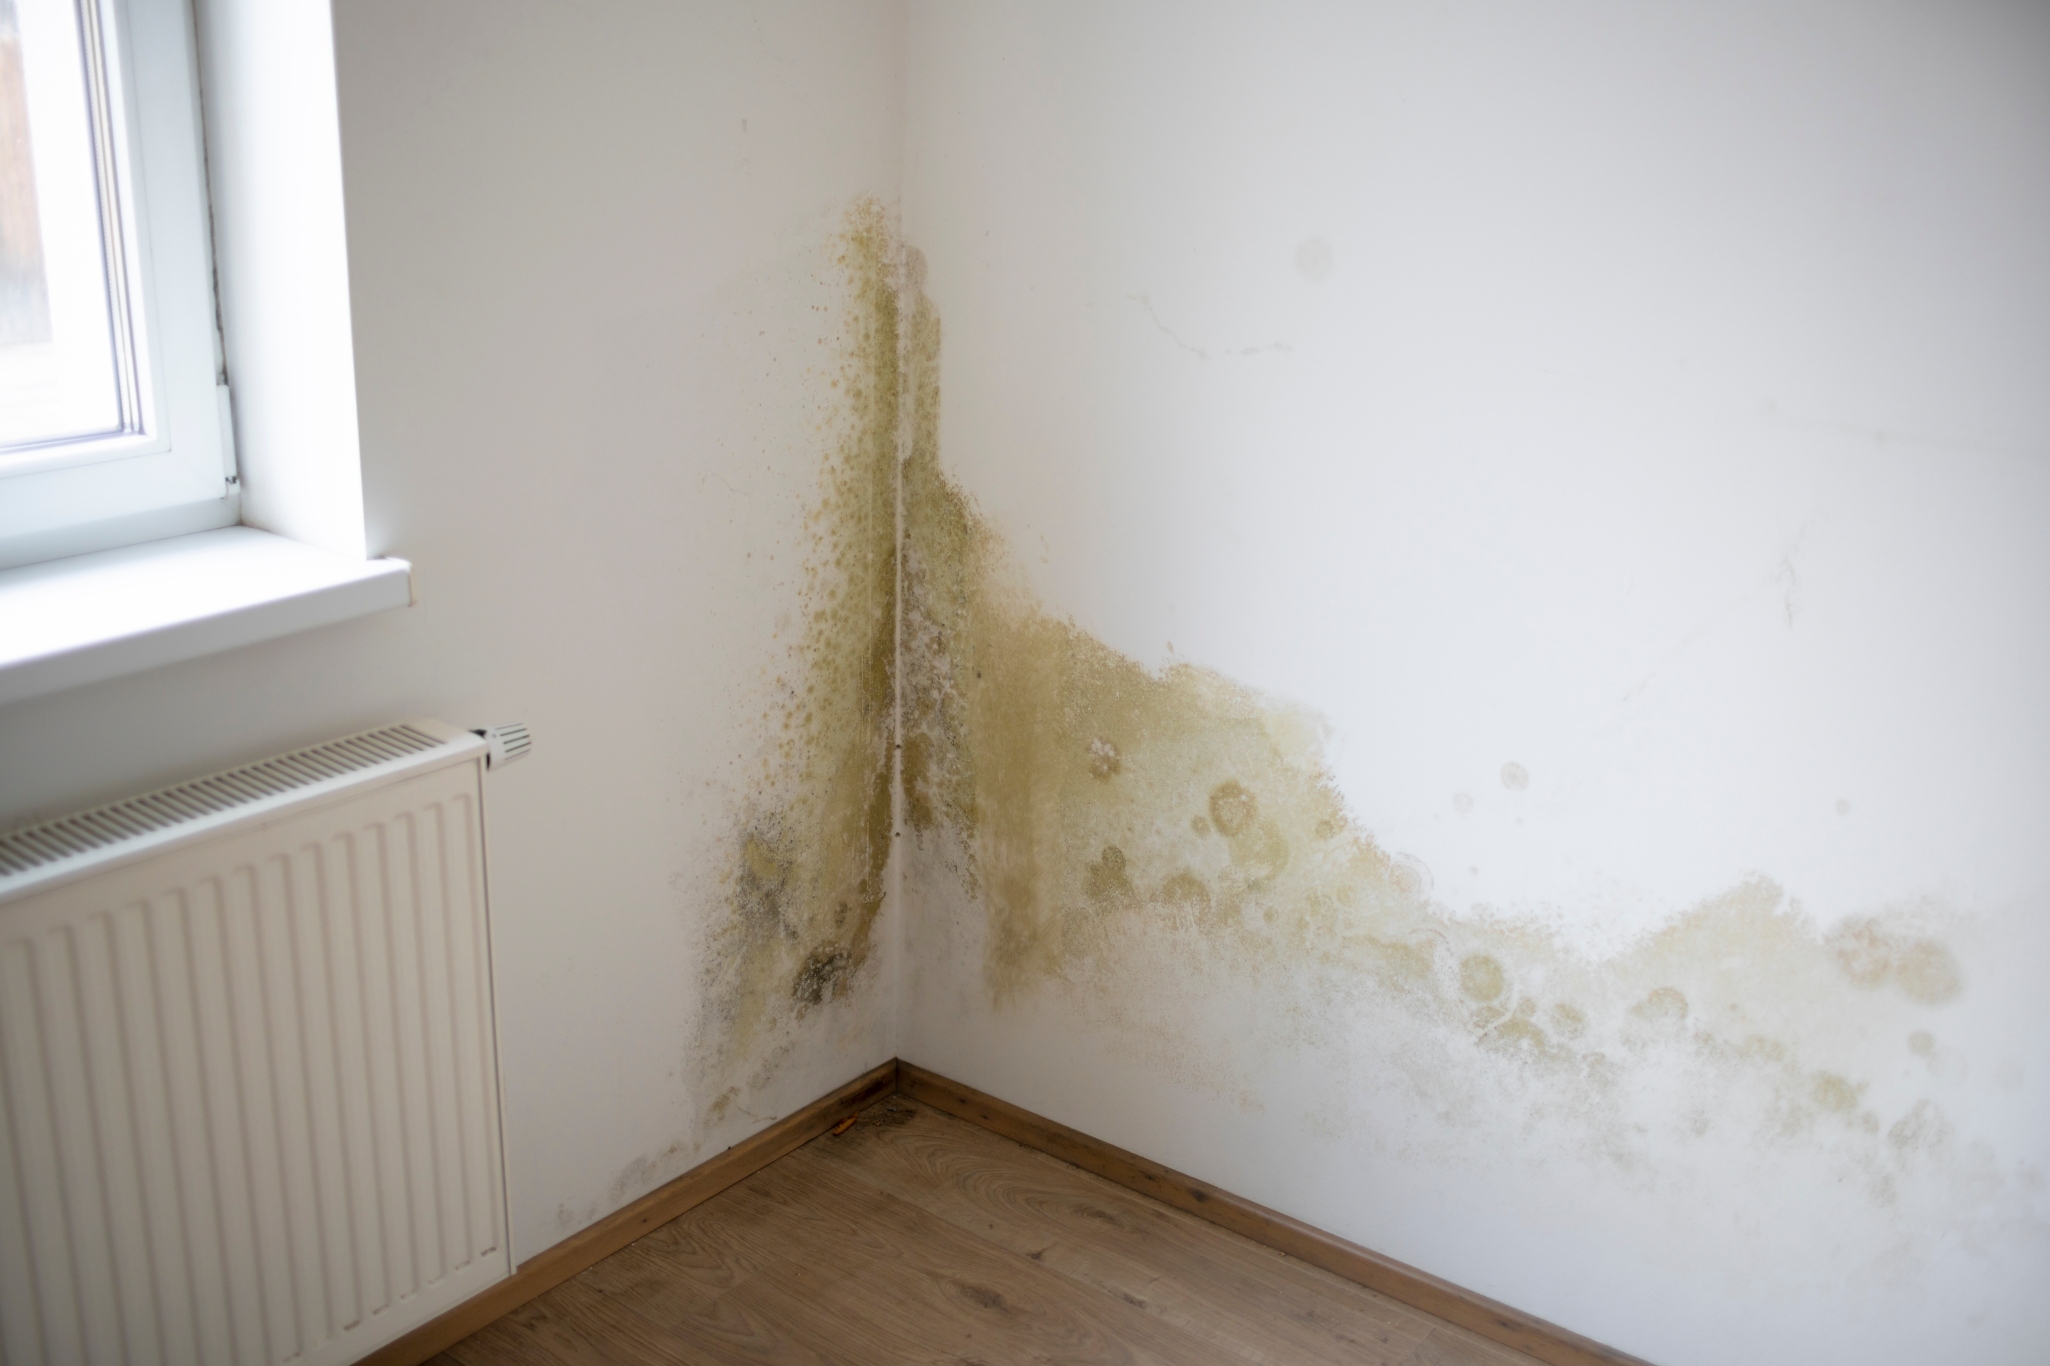 Damp on inside wall of listed property